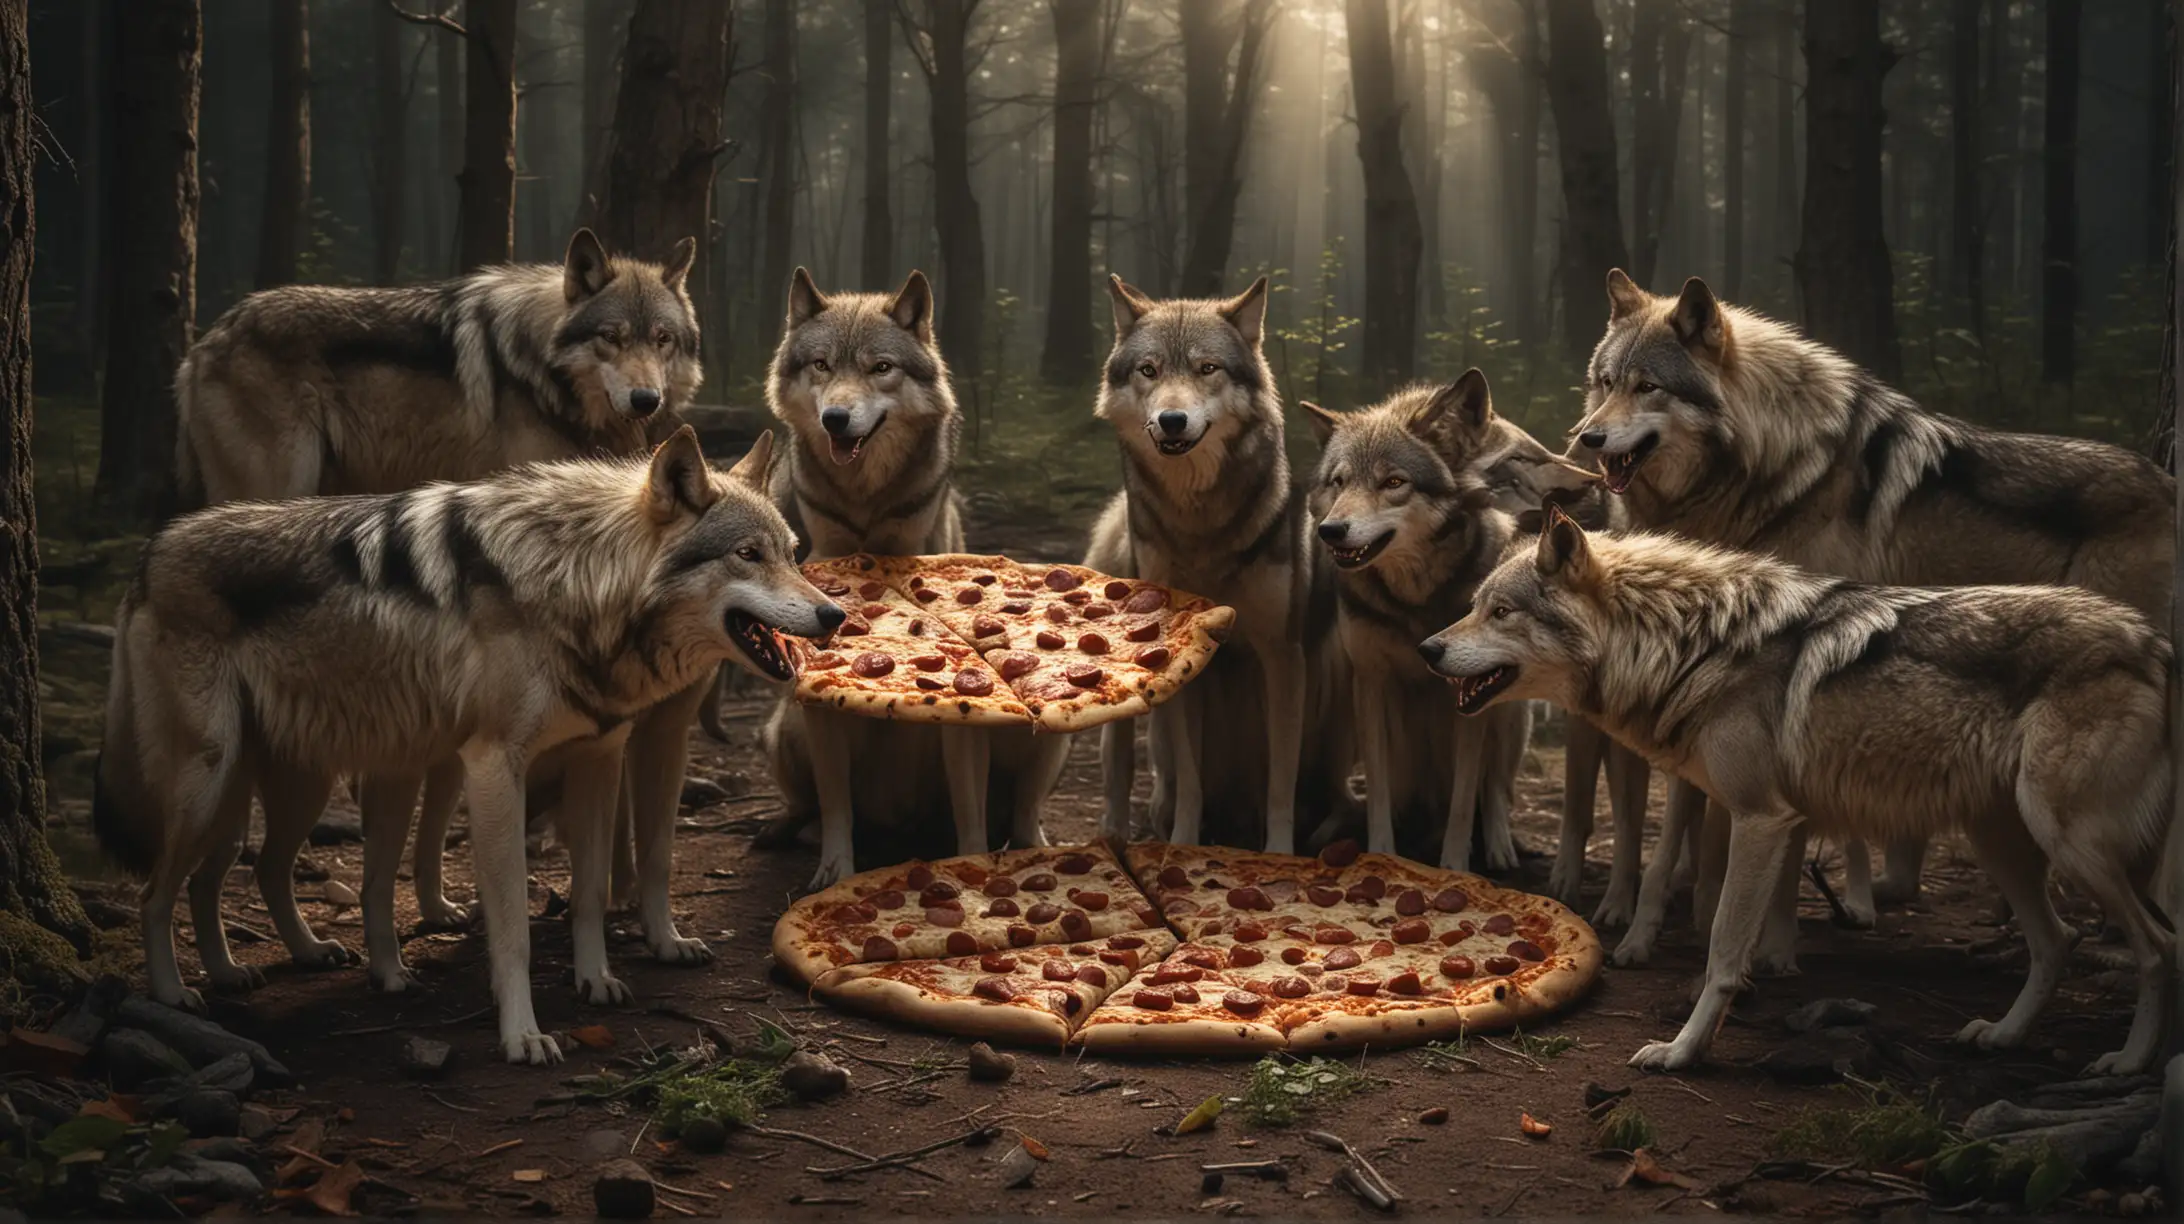 Pack of Wolves Enjoying Pizza Feast in Dramatic Forest Setting